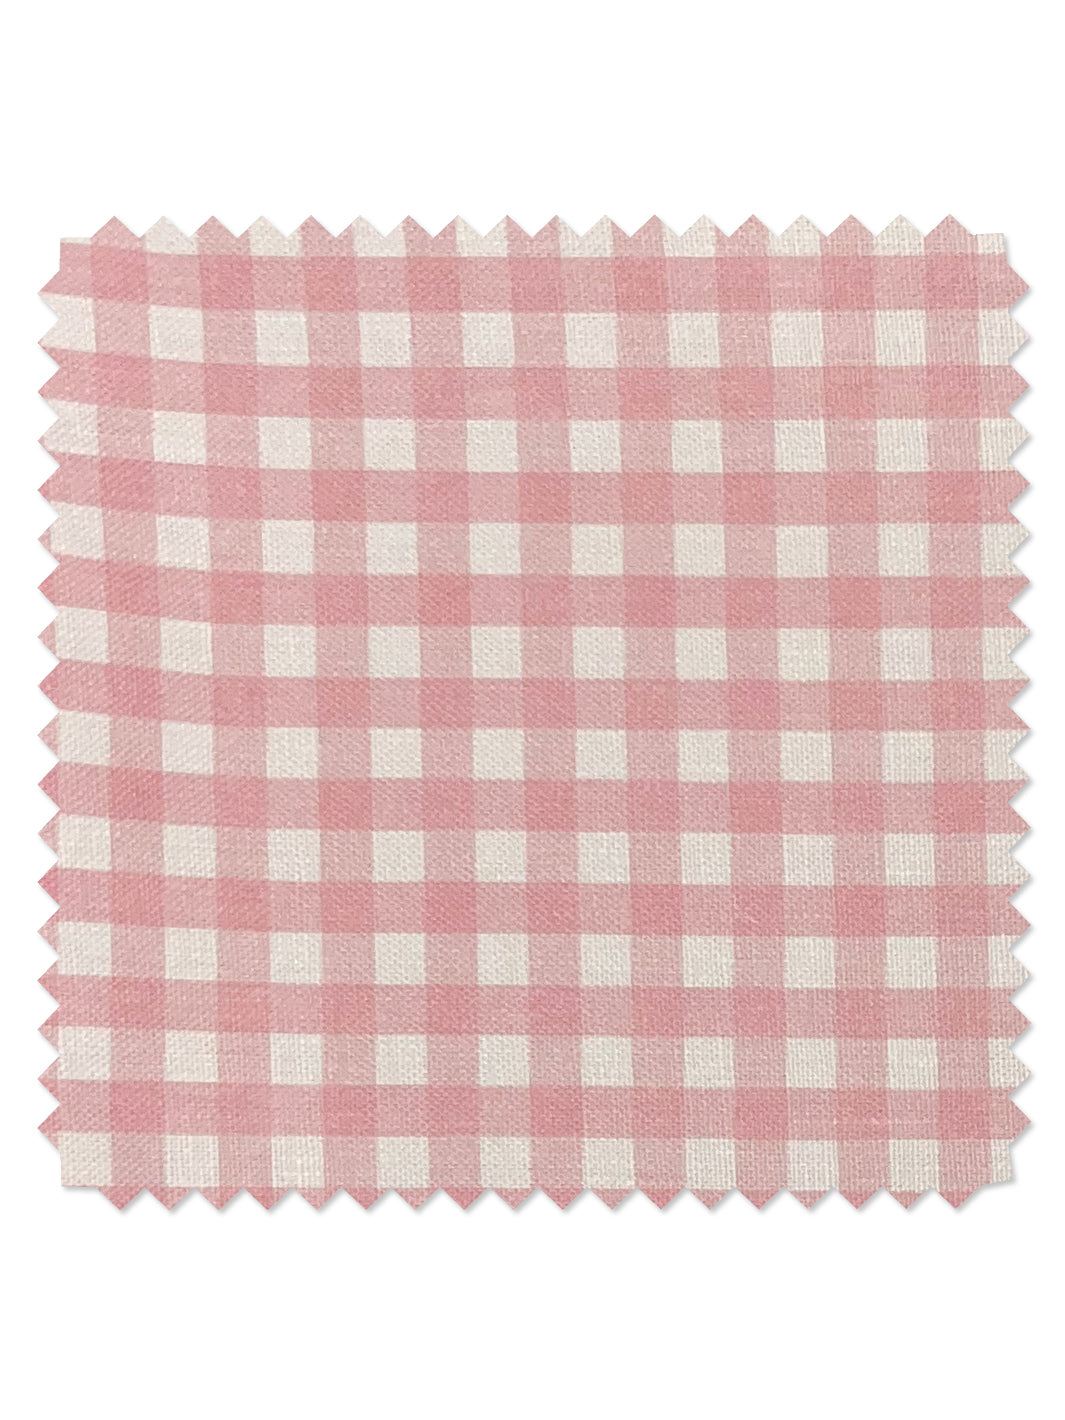 'Pixie Gingham' Linen Fabric by Sarah Jessica Parker - Pink